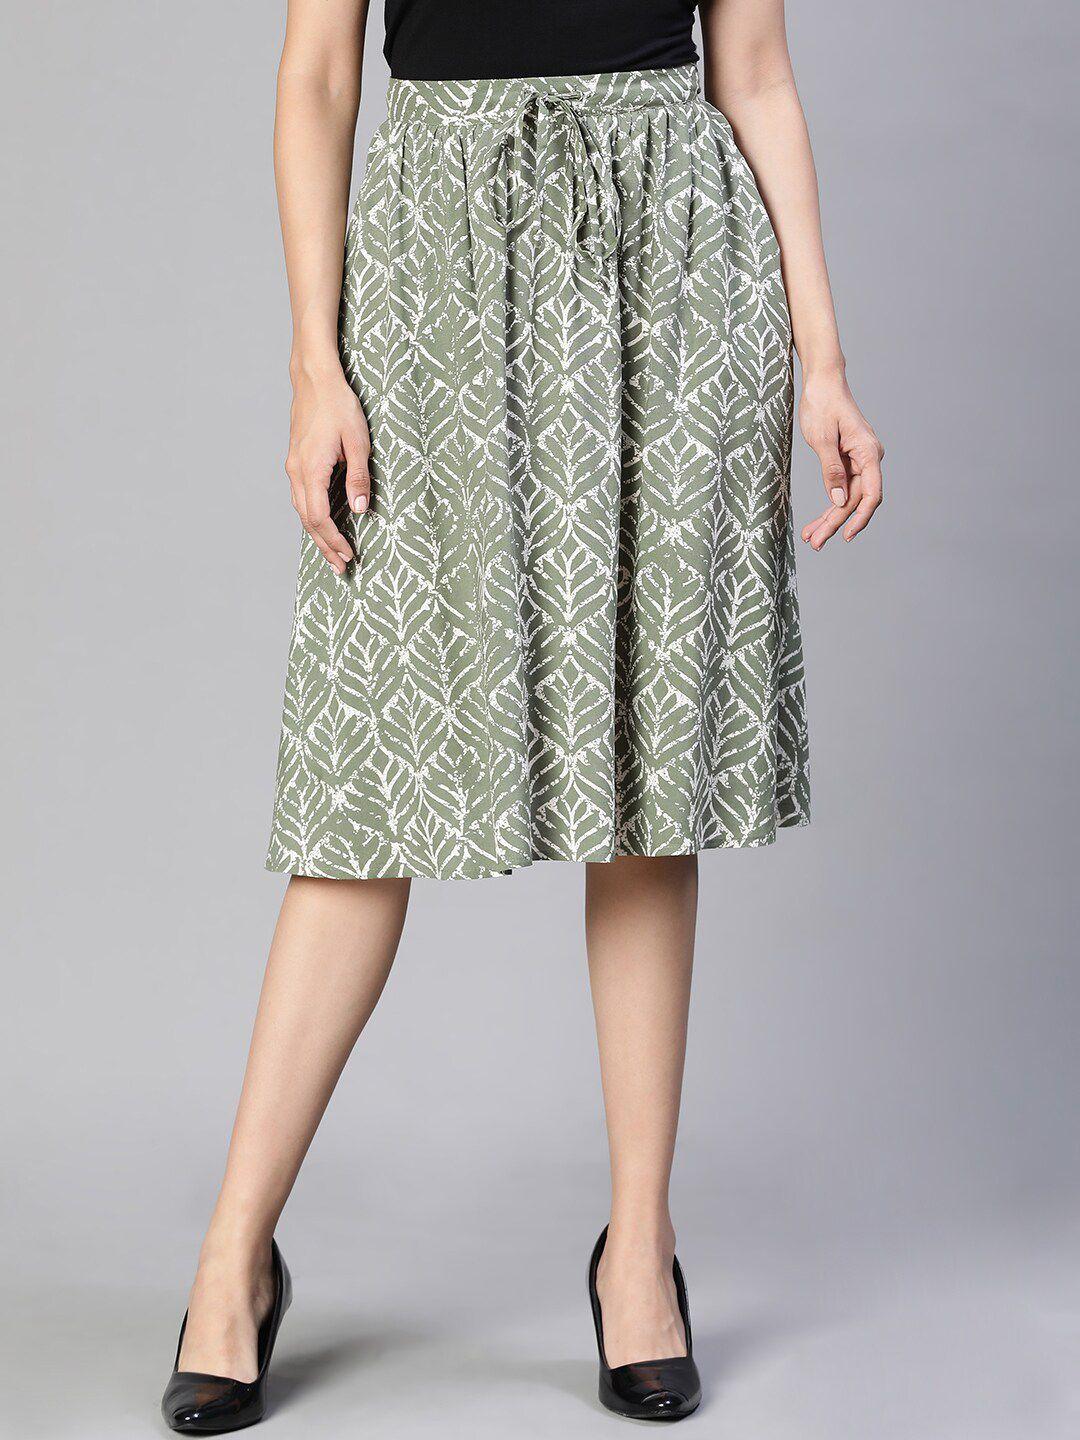 oxolloxo-ethnic-motifs-printed-pleated-flared-skirt